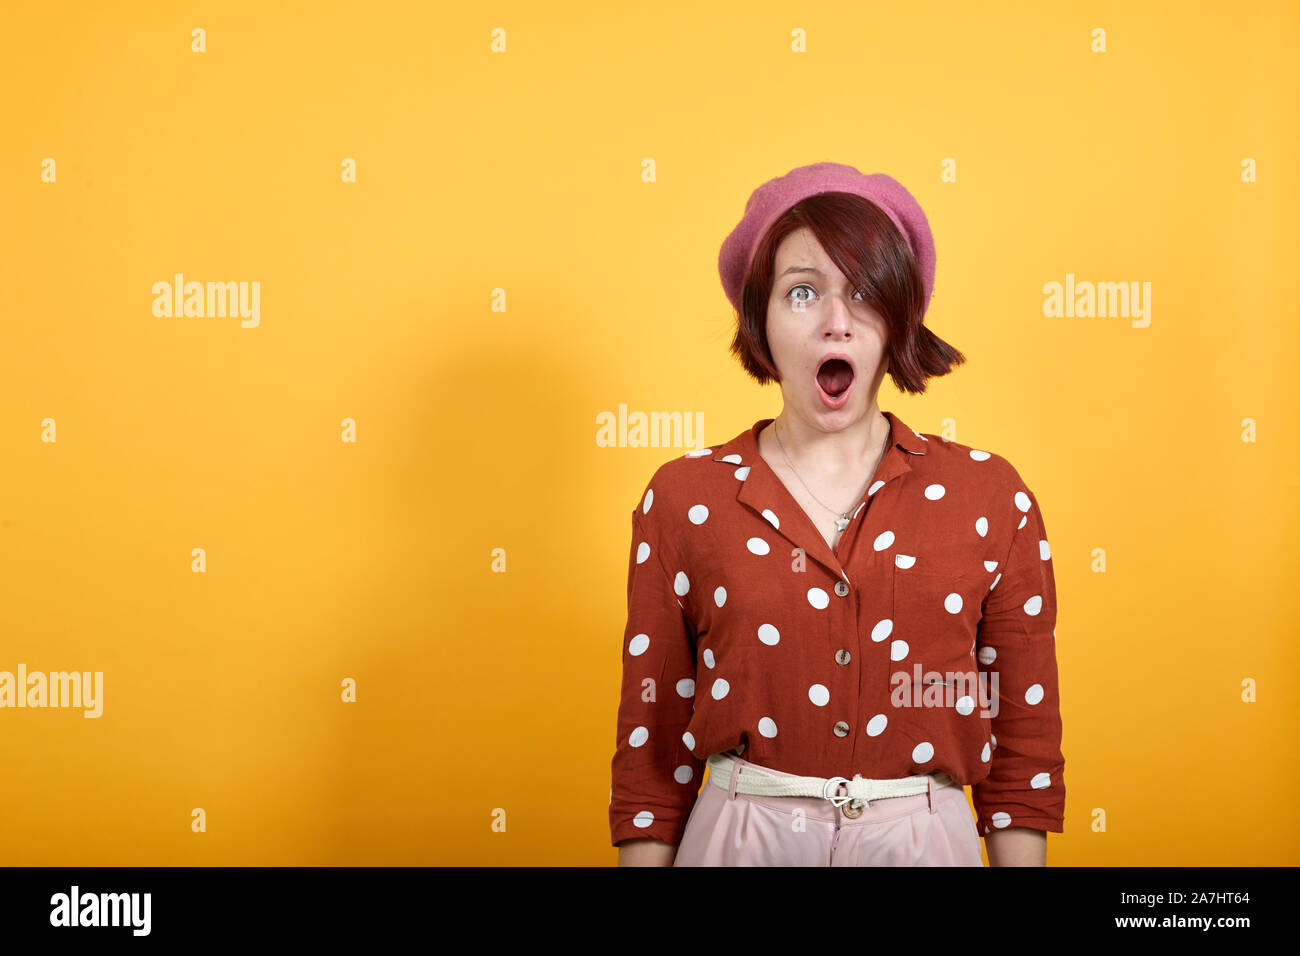 Attractive woman looking scared and surprised cheering expressing wow gesture Stock Photo